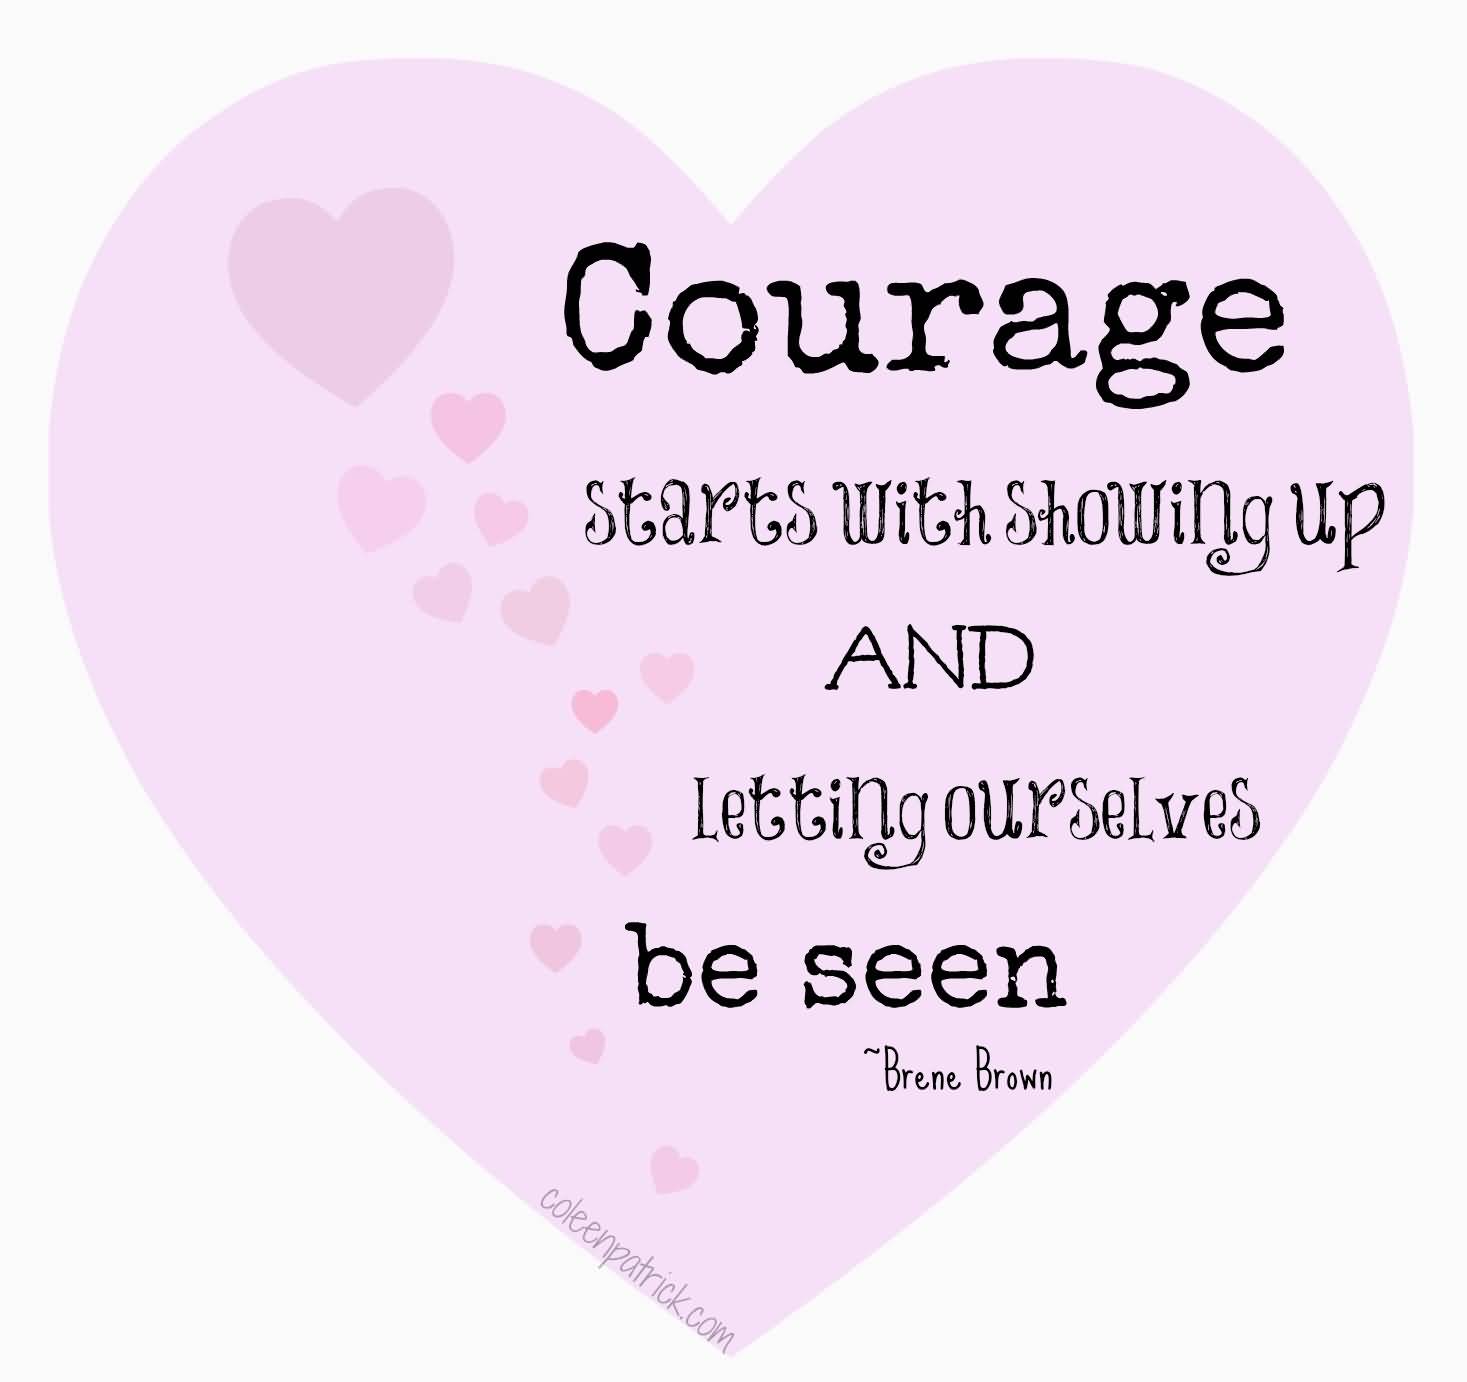 Courage Starts With Showing Up And Letting Ourselves Be Seen - Brene Brown